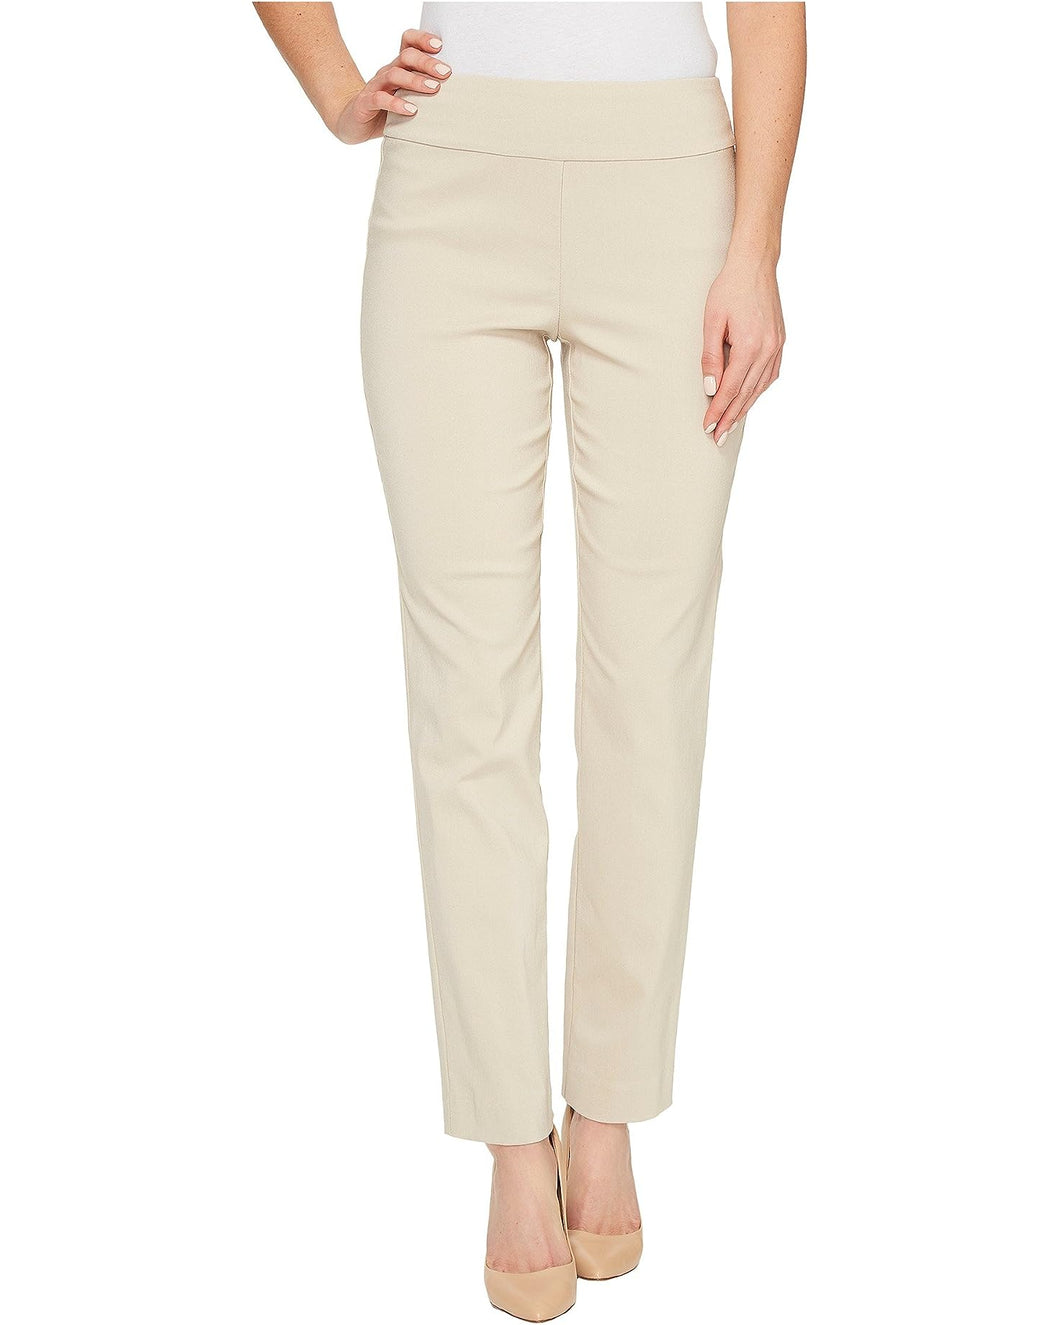 Krazy Larry Pull on Pant in Stone Style P-508